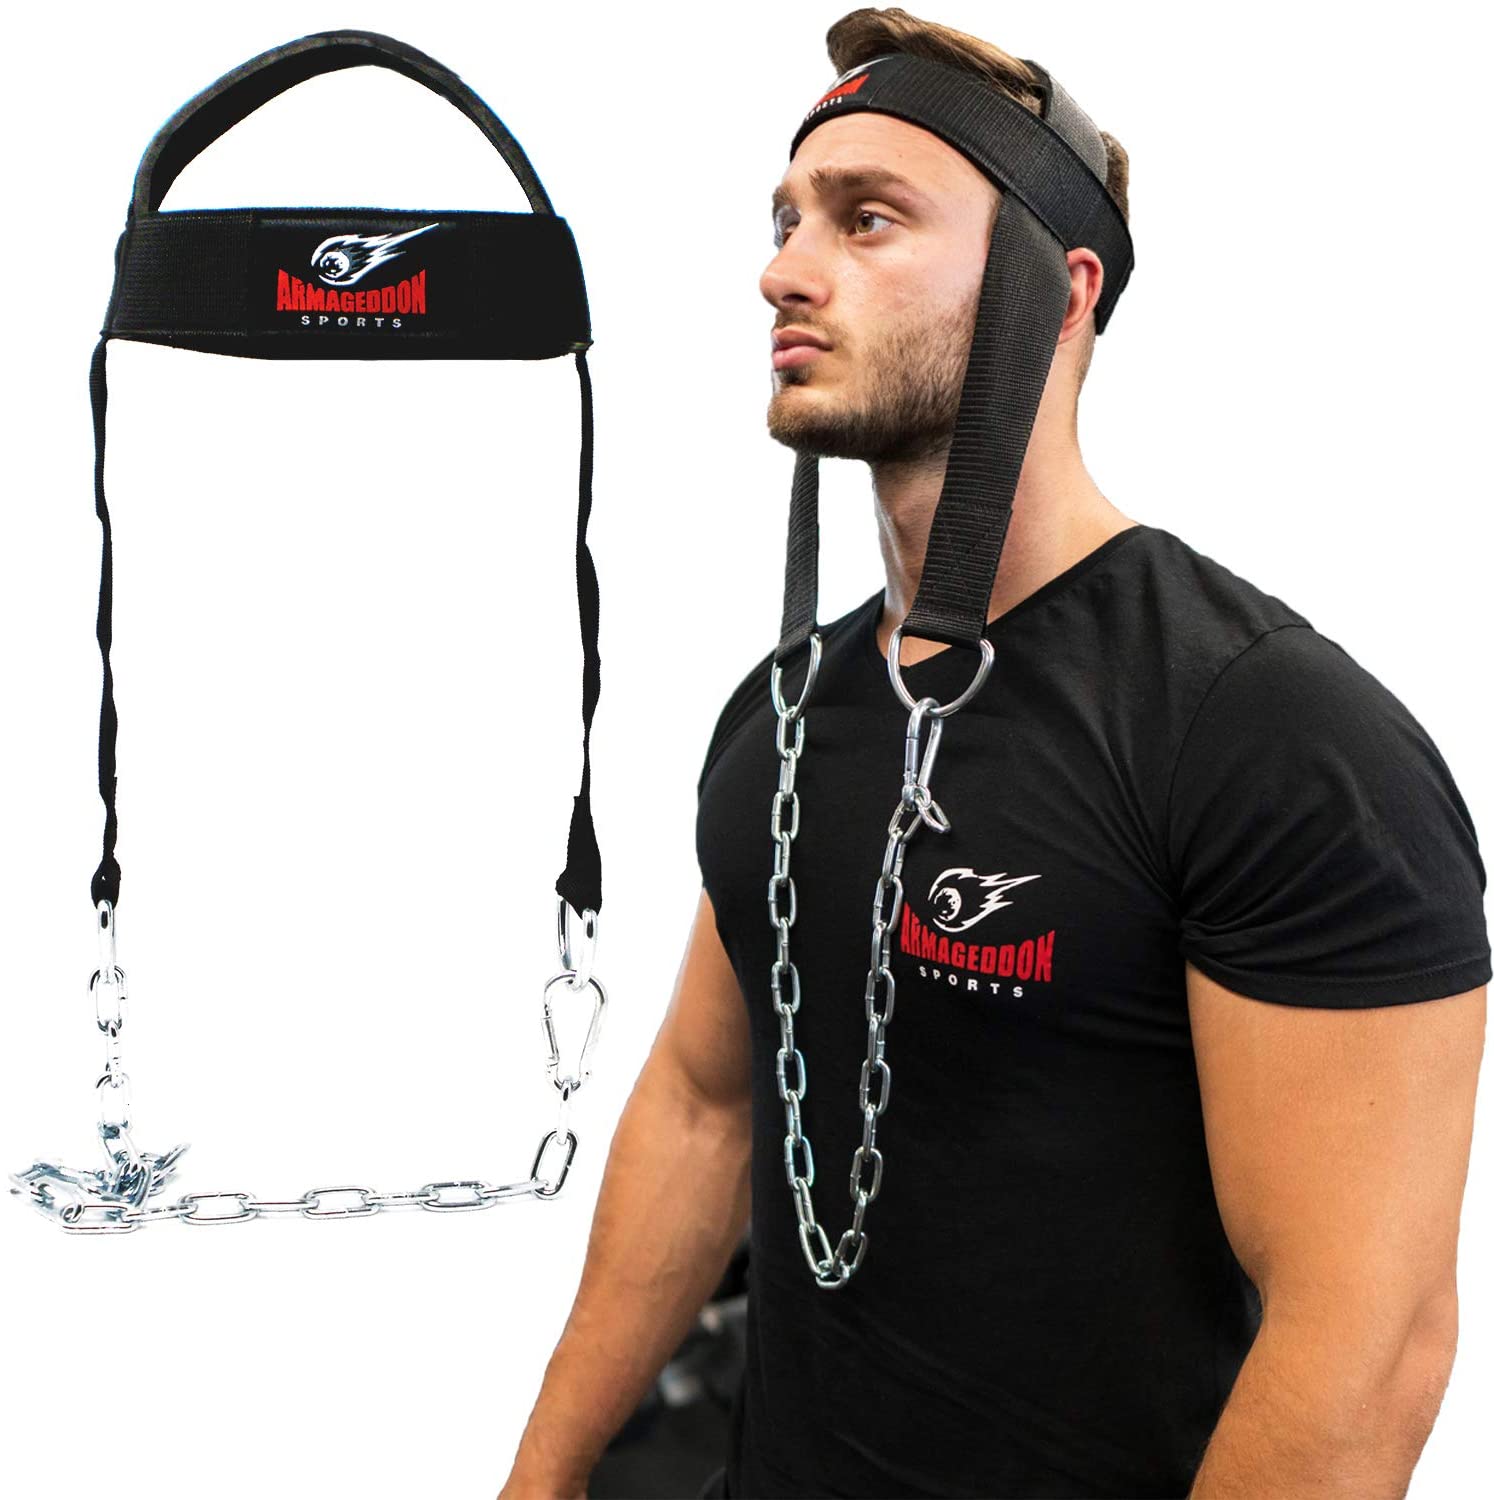 Armageddon Sports Padded Neck Harness For Weightlifting